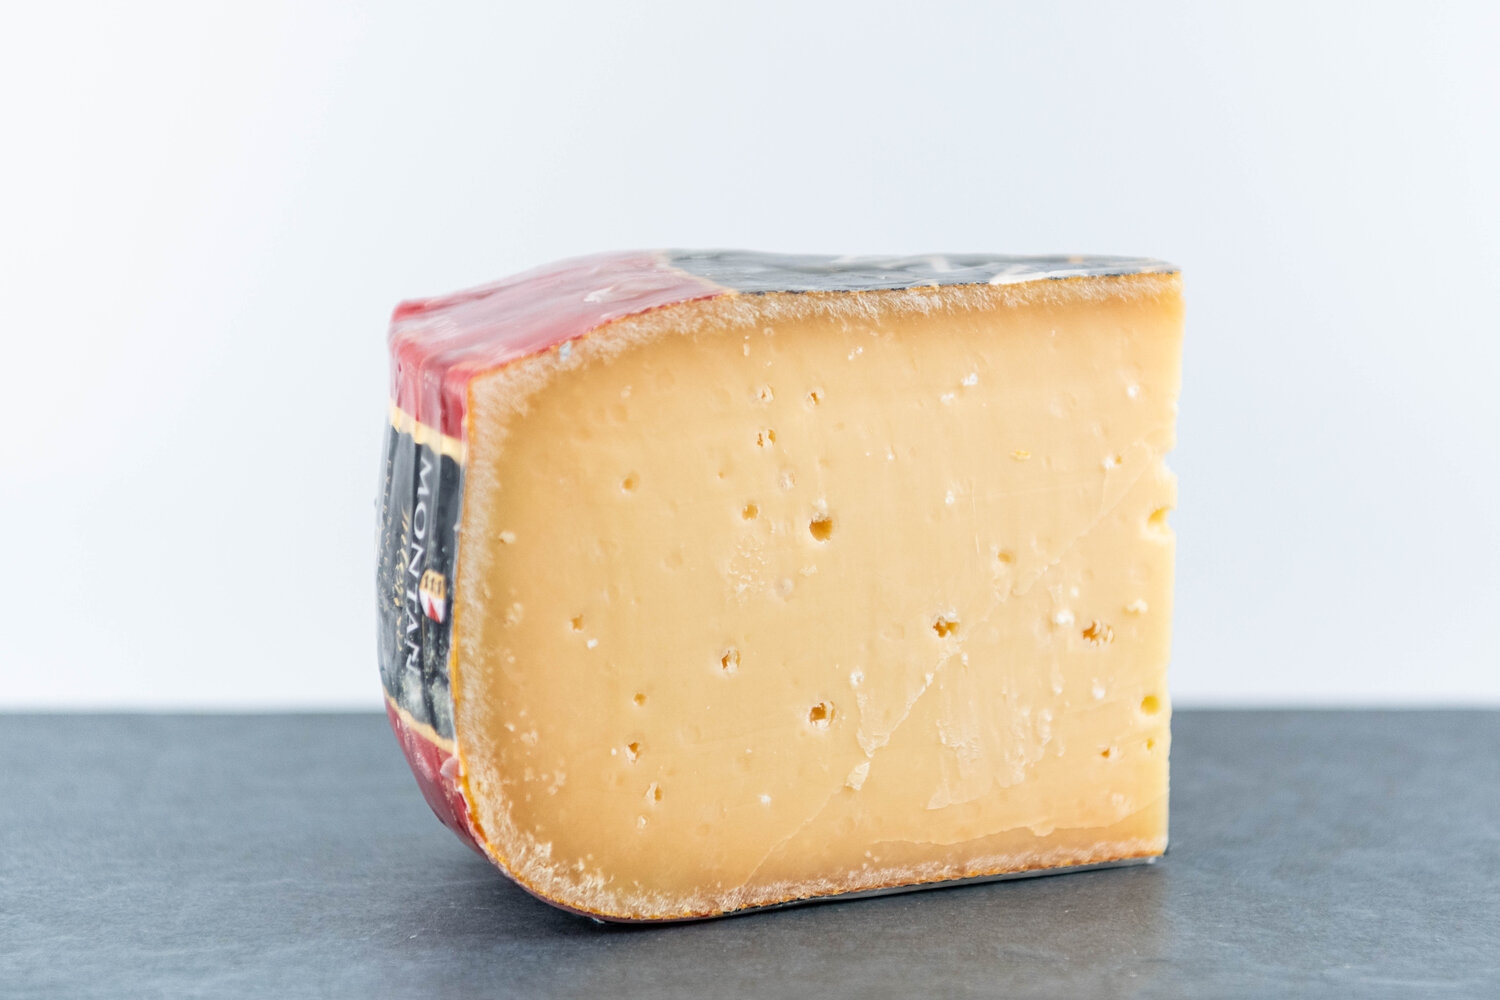 Montana Intenso Extra Aged Cheese